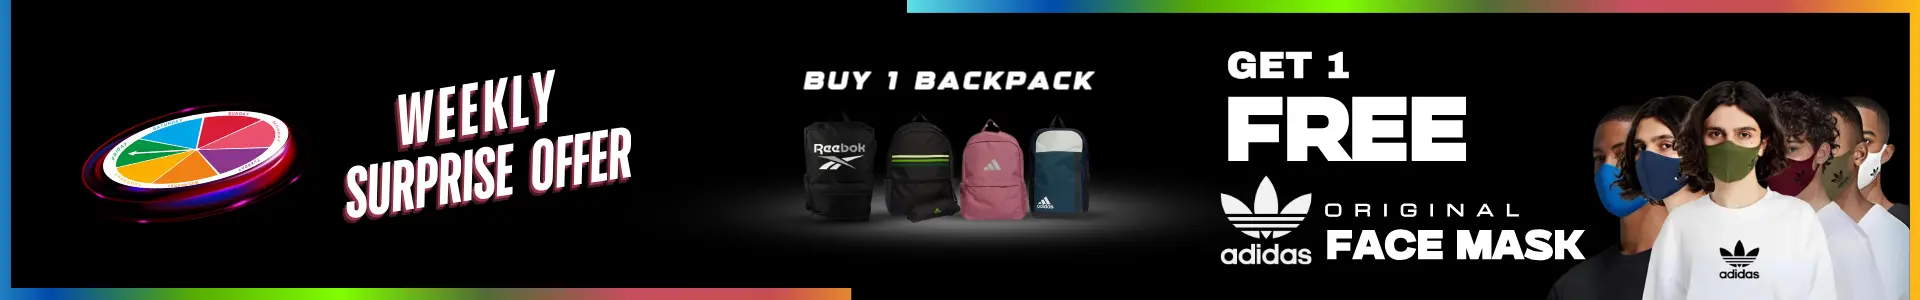 weekly surprise offer face mask backpack offers